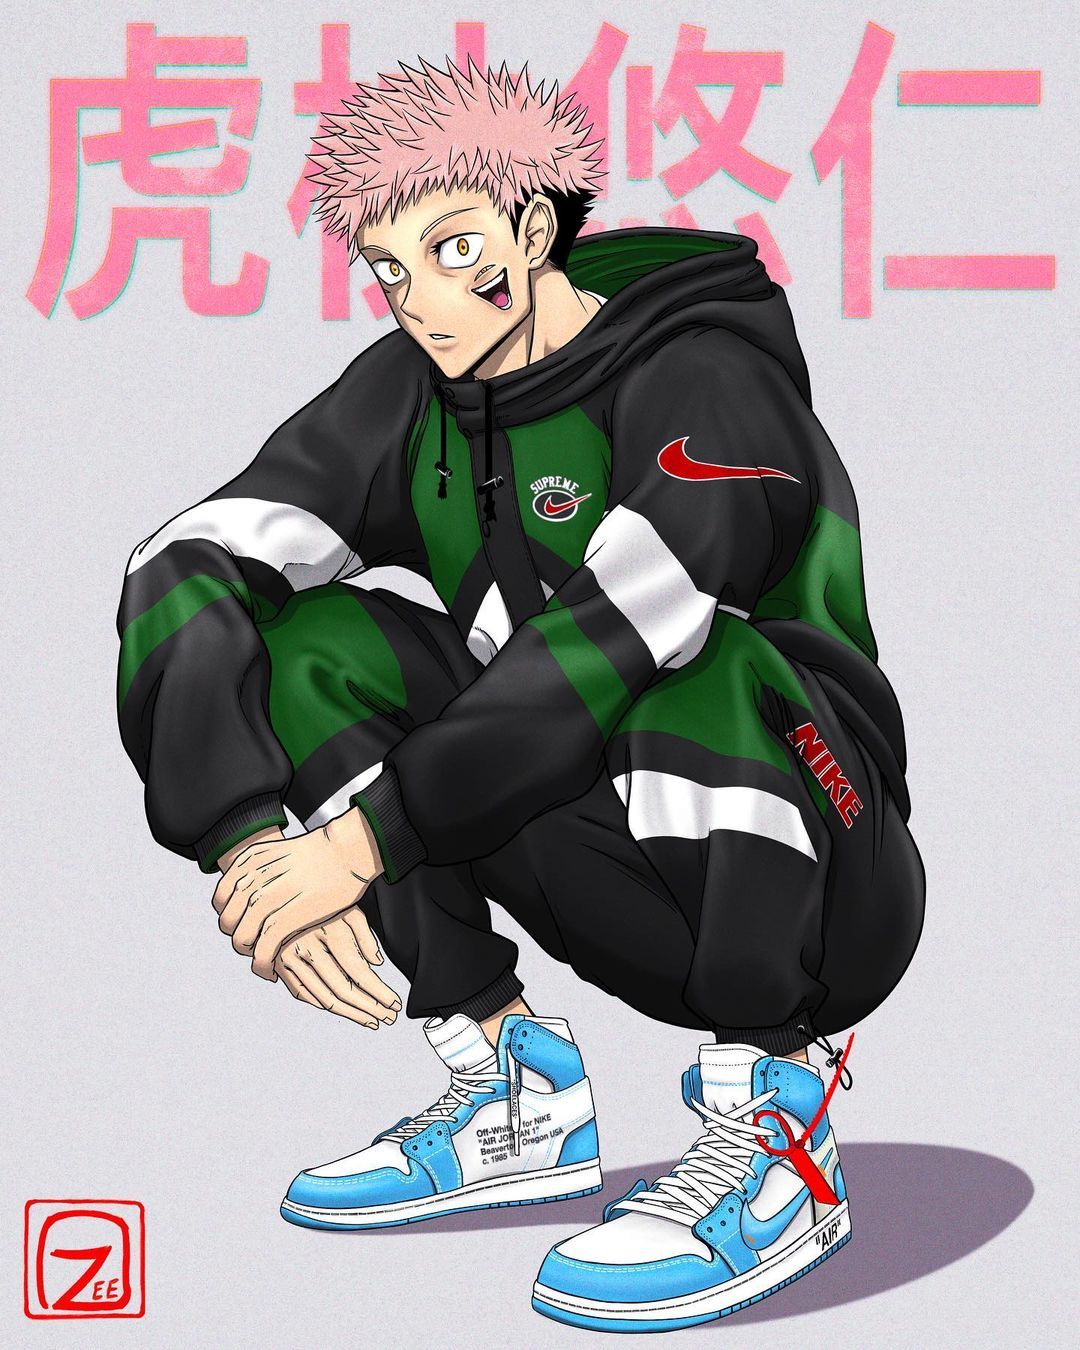 OZEE on Instagram: “HAPPY NEW YEAR! I hope ya'll are able to spent New years eve with your family and love. Anime hypebeast, Gangsta anime, Anime character design